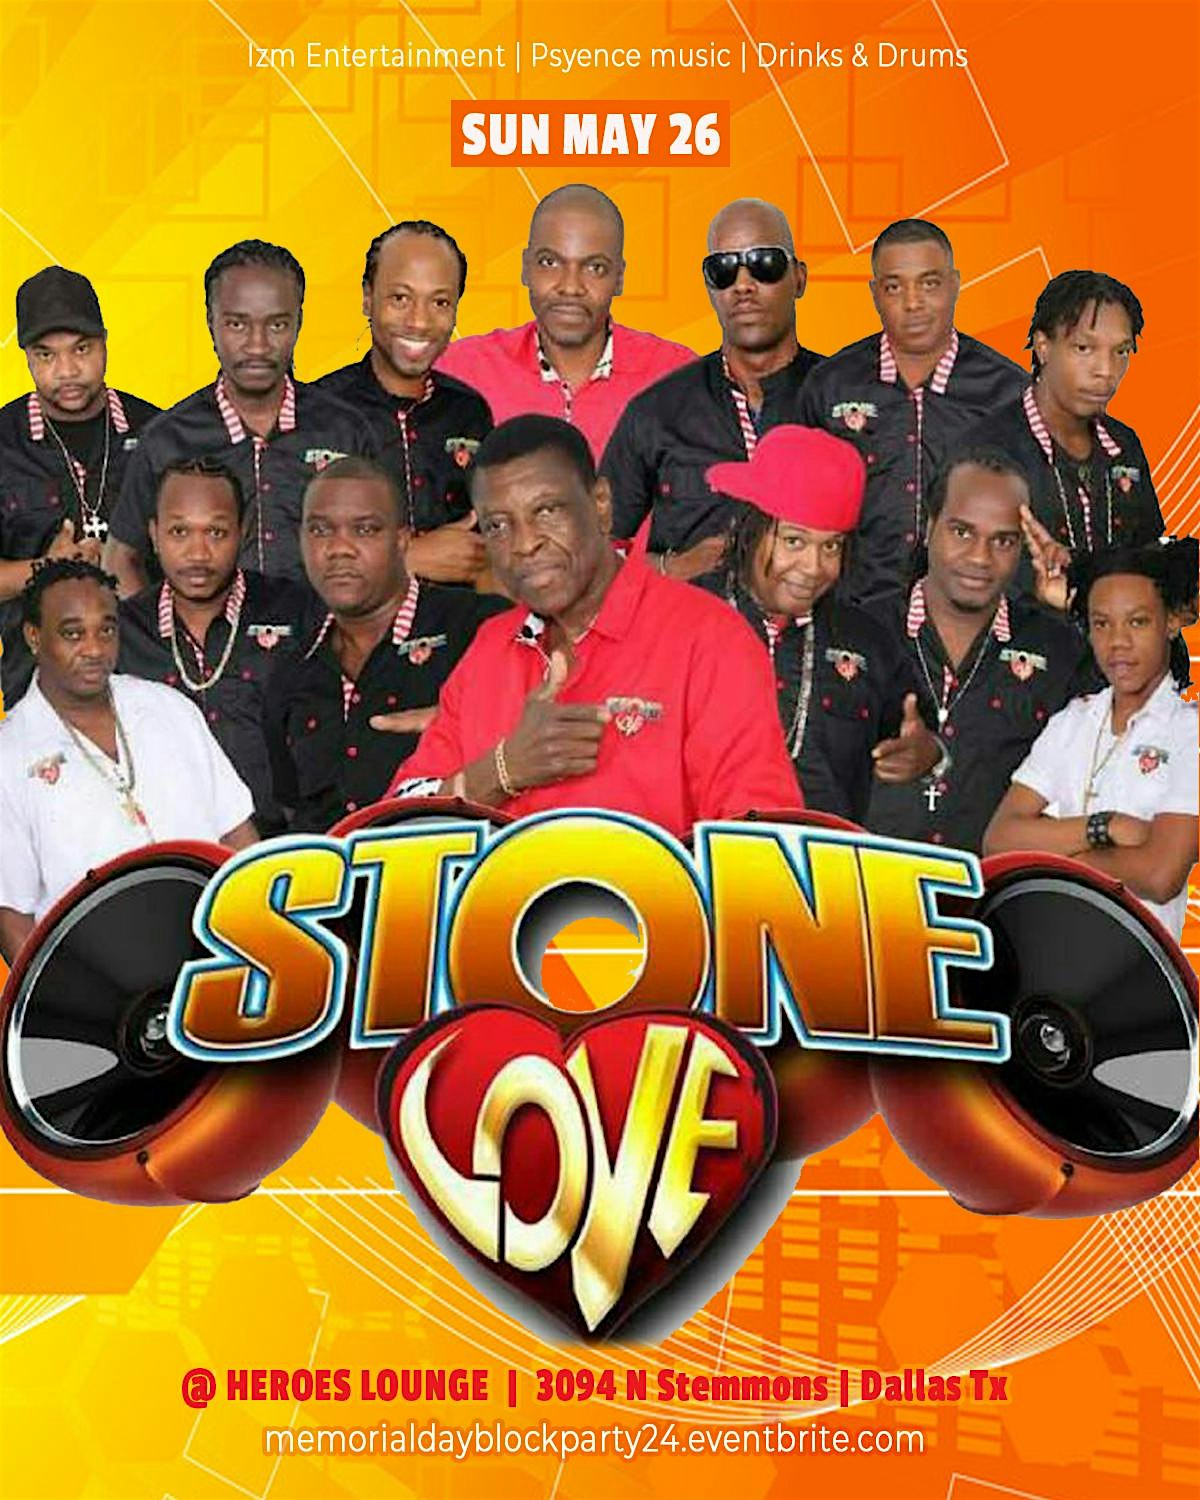 STONE LOVE live from Jamaica | BLOCK PARTY